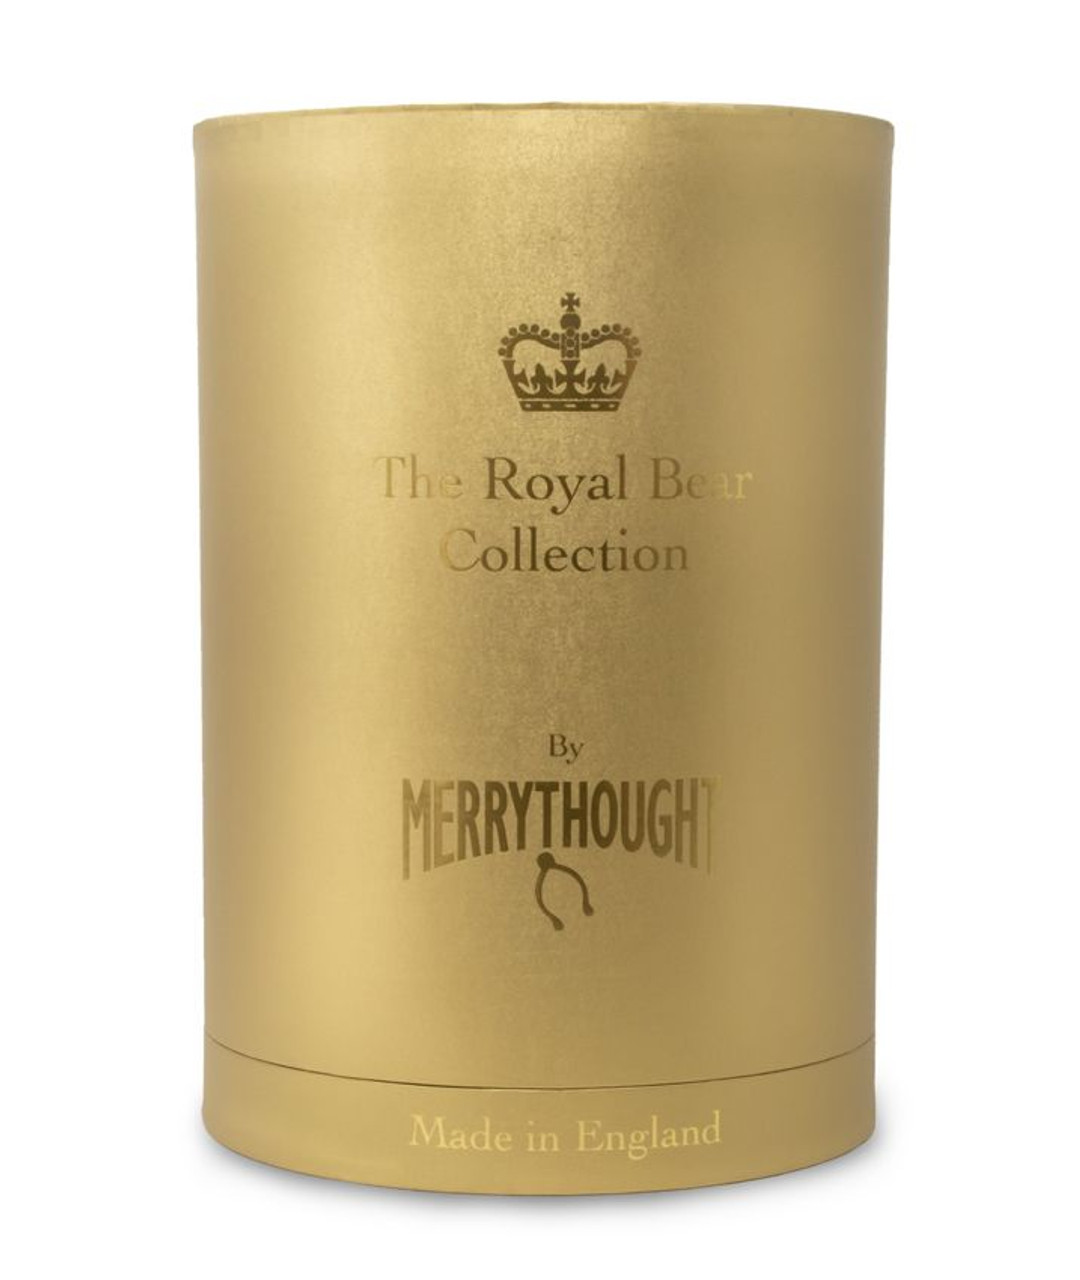 Drum Box for King Charles III’s Coronation Commemorative Teddy Bear - Merrythought